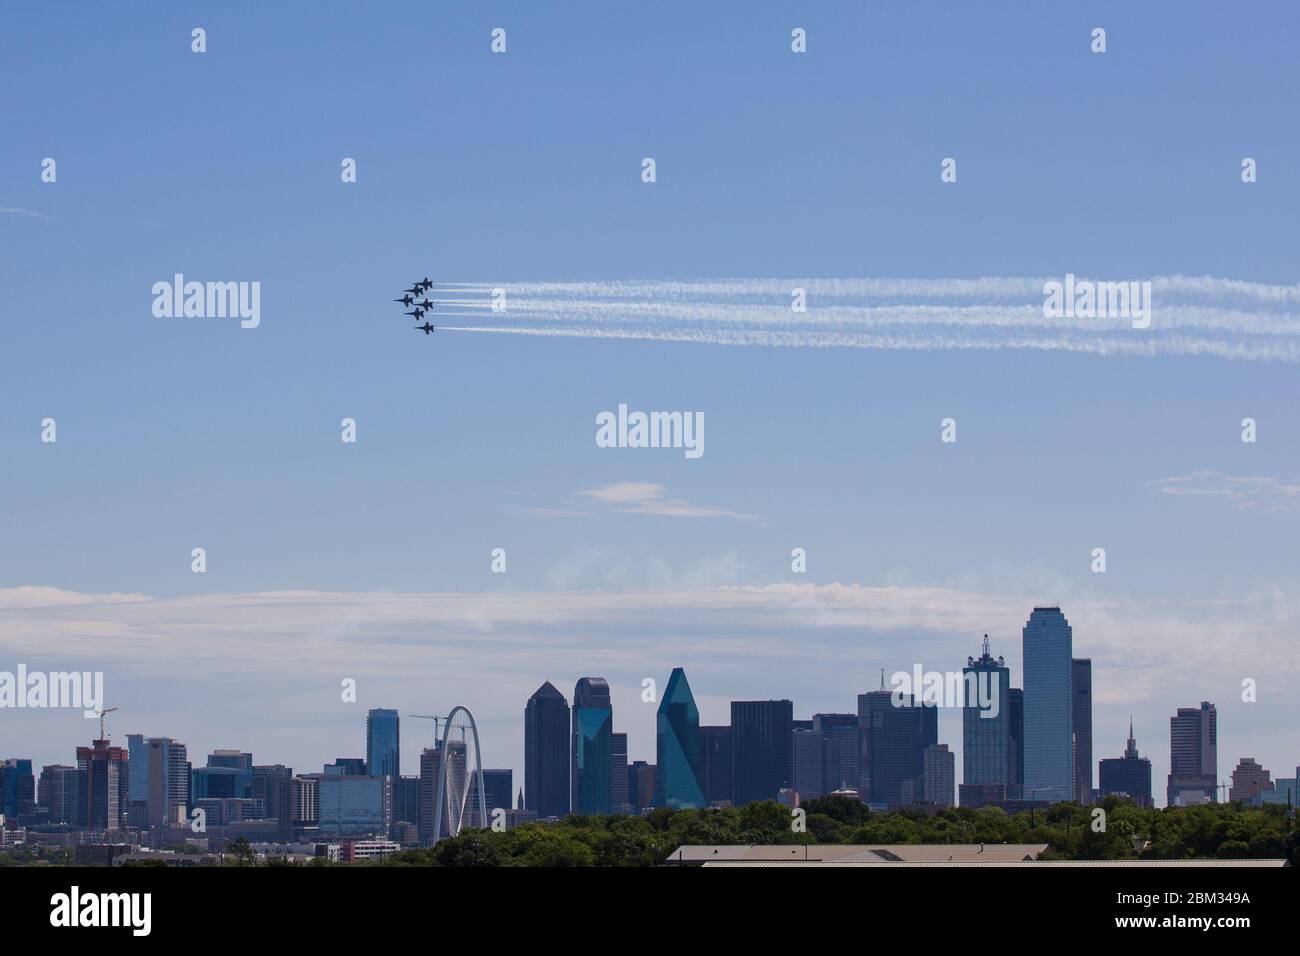 Dallas, USA. 6th May, 2020. A formation of the Blue Angels fly over Dallas and Fort Worth, Texas, the United States, on May 6, 2020. Jets from the U.S. Navy's Blue Angels flew over the southern states of Texas and Louisiana as a way to honor the frontline workers fighting the COVID-19 pandemic. The flyover started around noon in northern Texas Dallas-Fort Worth area and continued south over the largest Texas city of Houston and New Orleans in Louisiana. Credit: Dan Tian/Xinhua/Alamy Live News Stock Photo